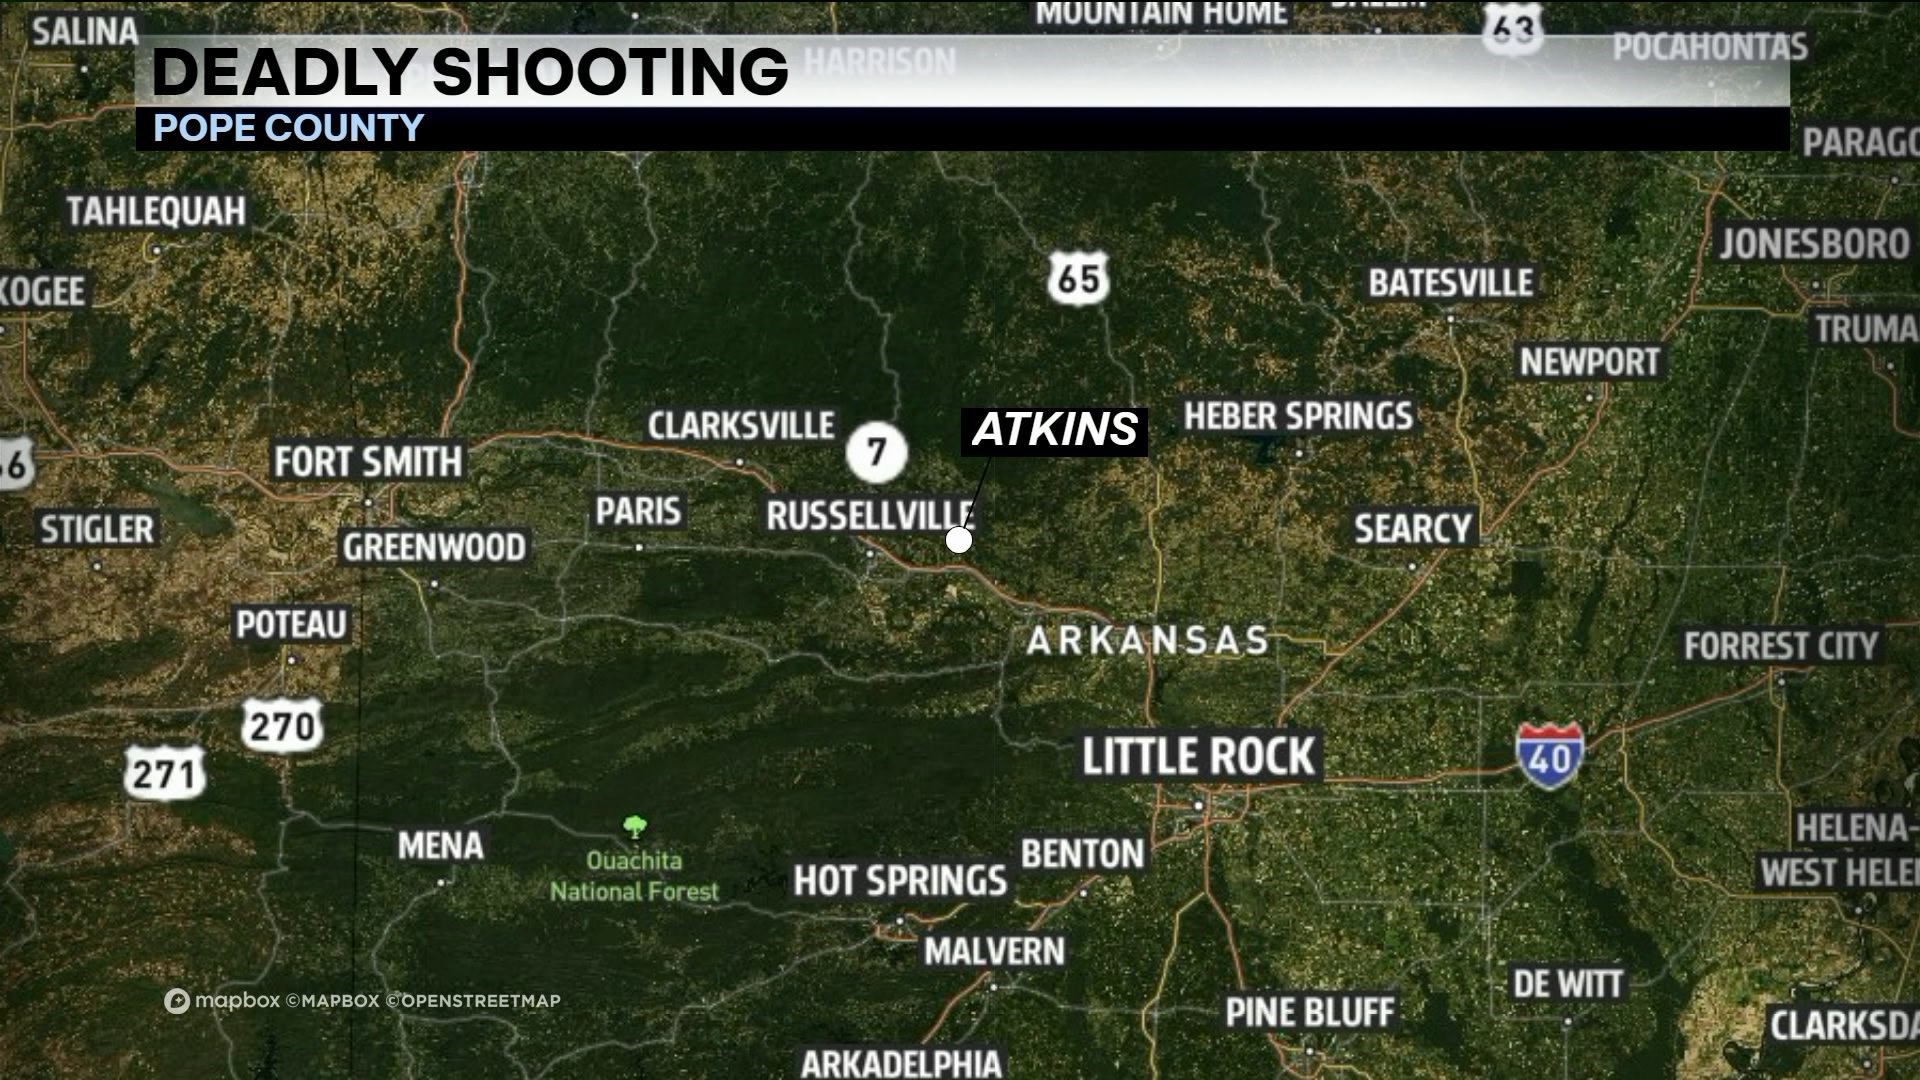 Man Found Dead After Shooting In Pope County